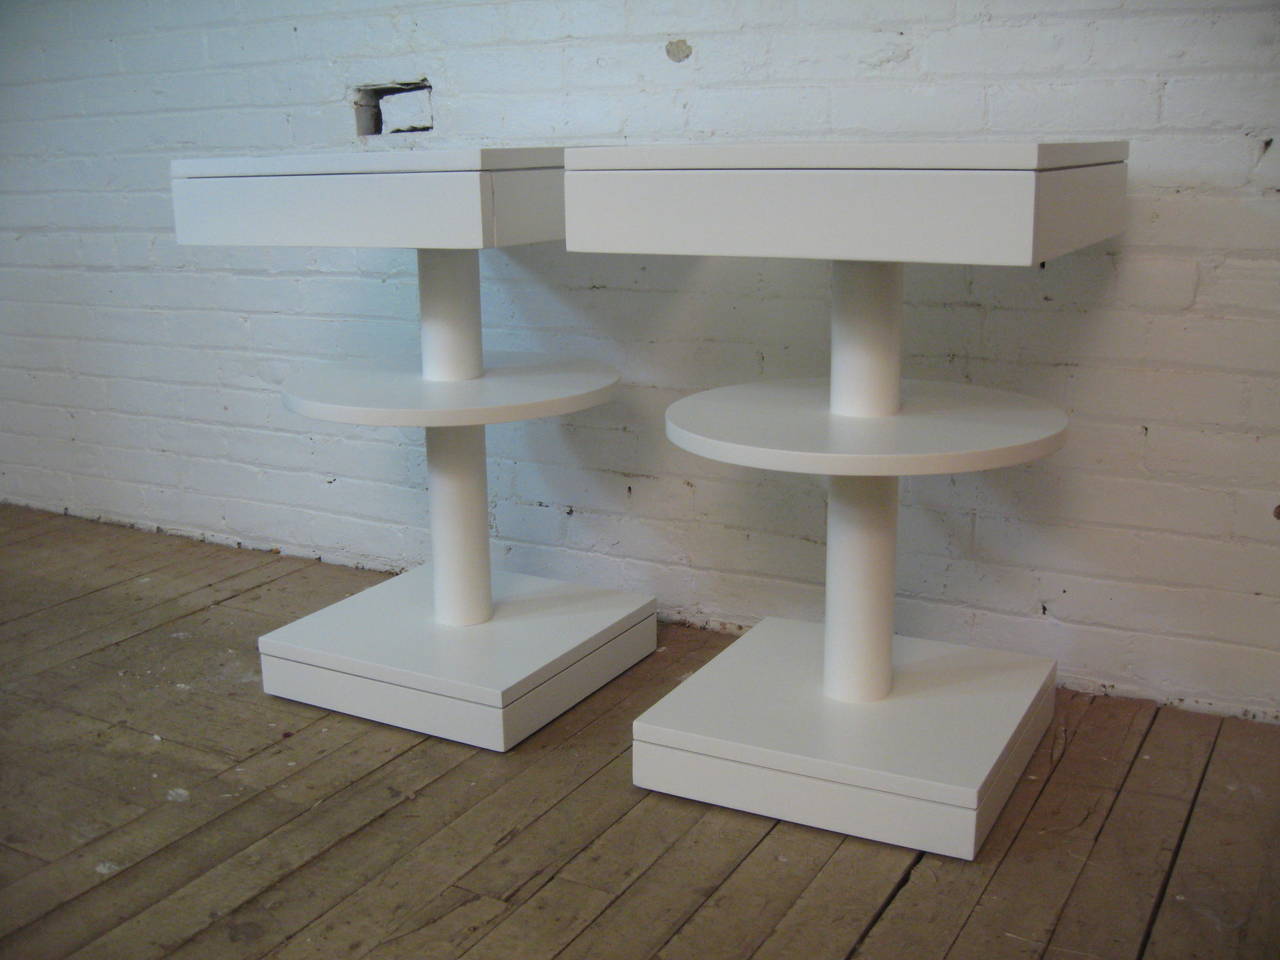 Truly amazing vintage single-drawer end tables. Lacquered in a semi gloss white. Drawer interiors are solid oak. The tops measure 18" x 18" while the bases measure 15" x 15". These geometric oddities make the perfect